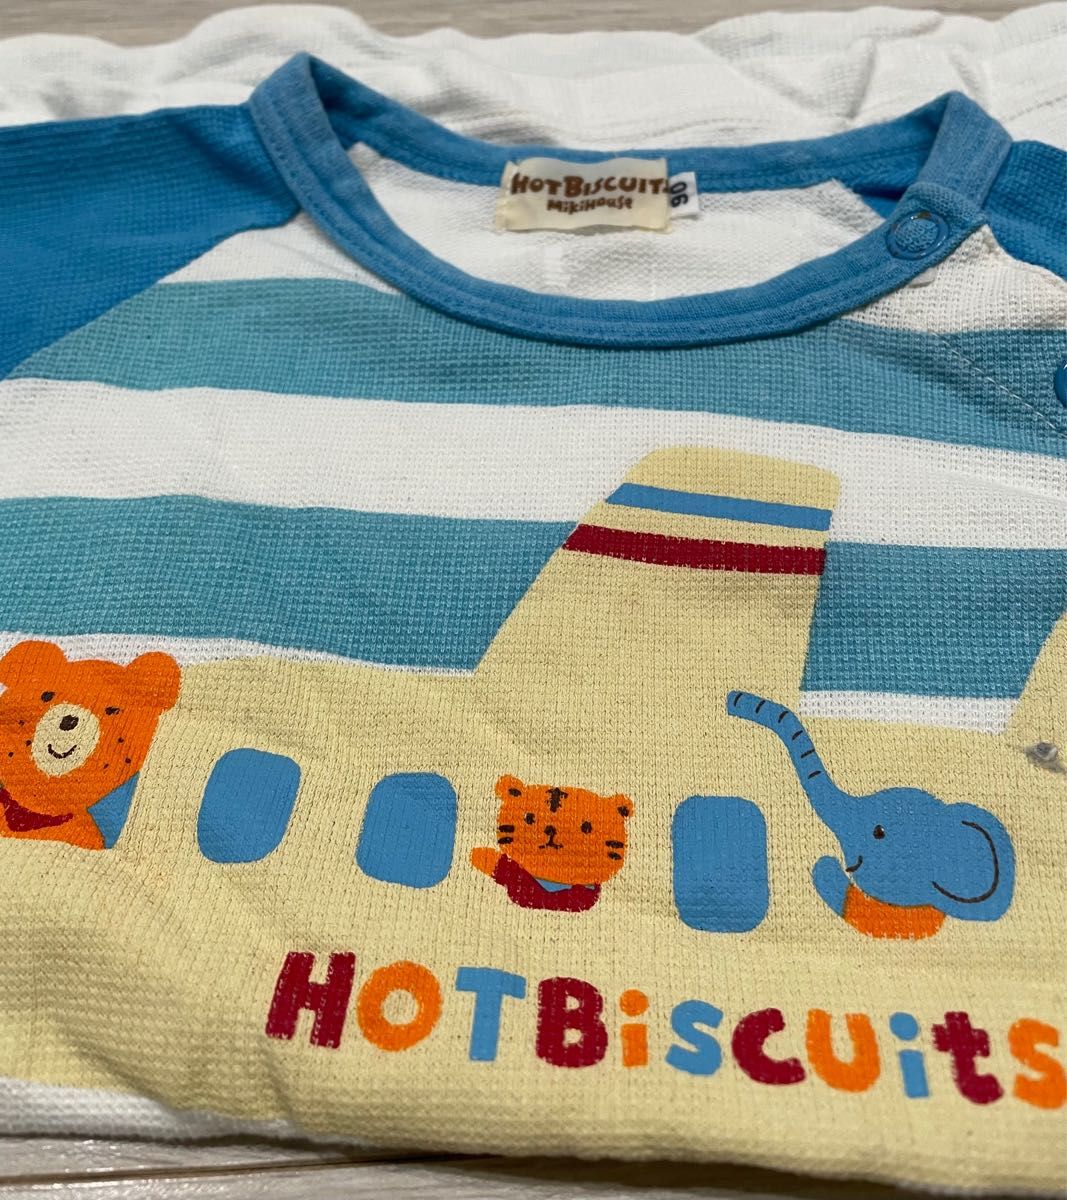 Hot Biscuits 半袖パジャマ90㌢